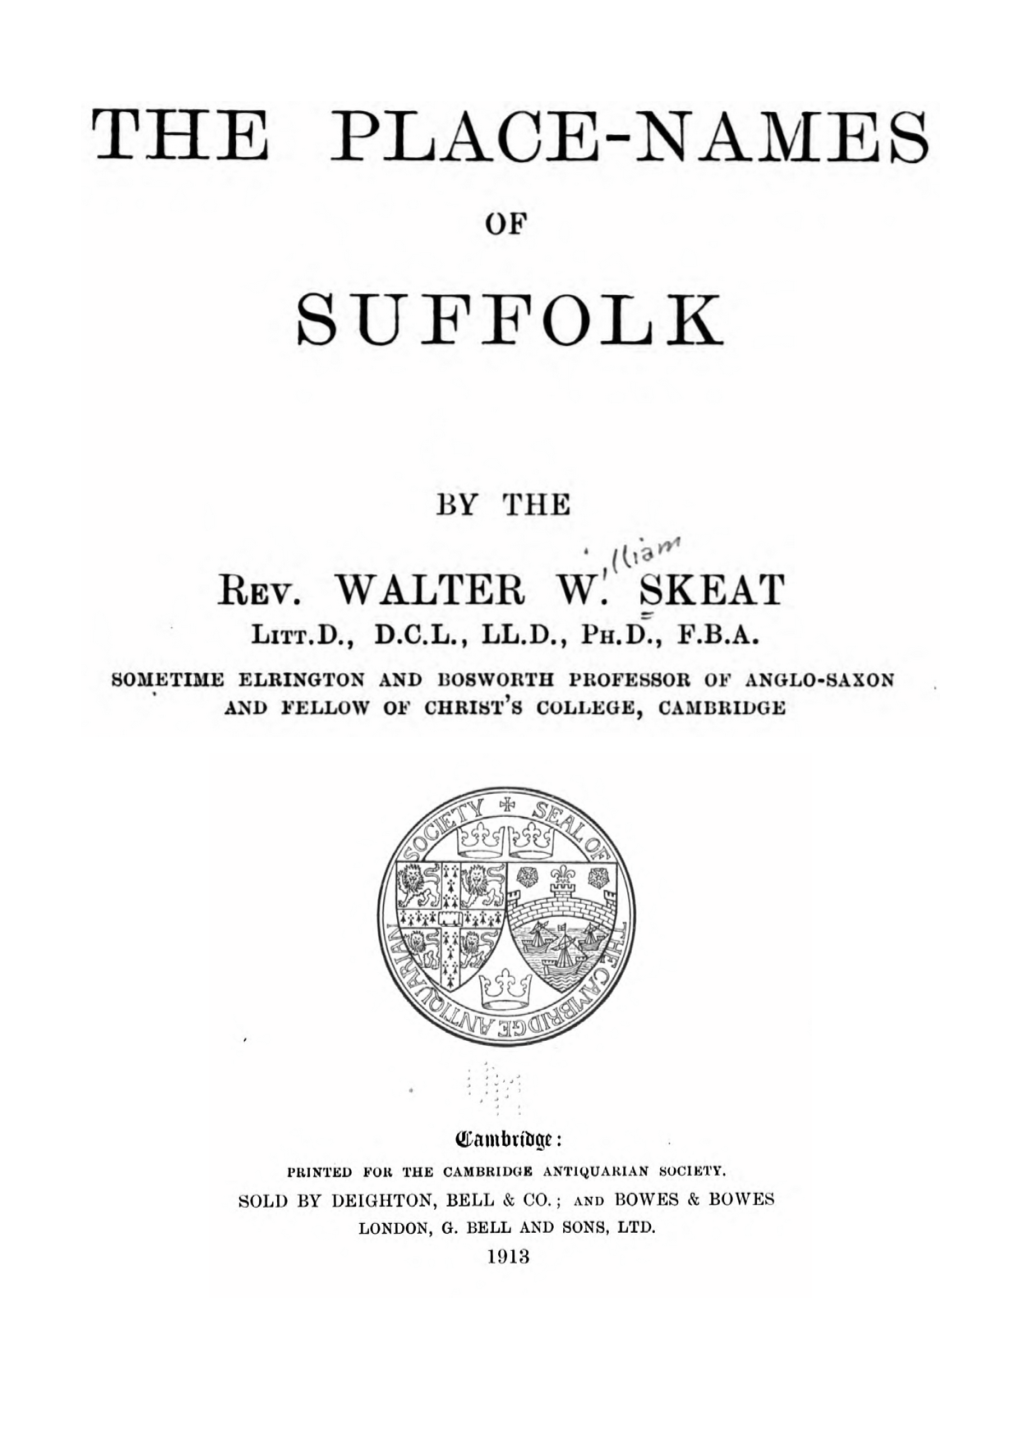 The Place-Names of Suffolk, by the Rev